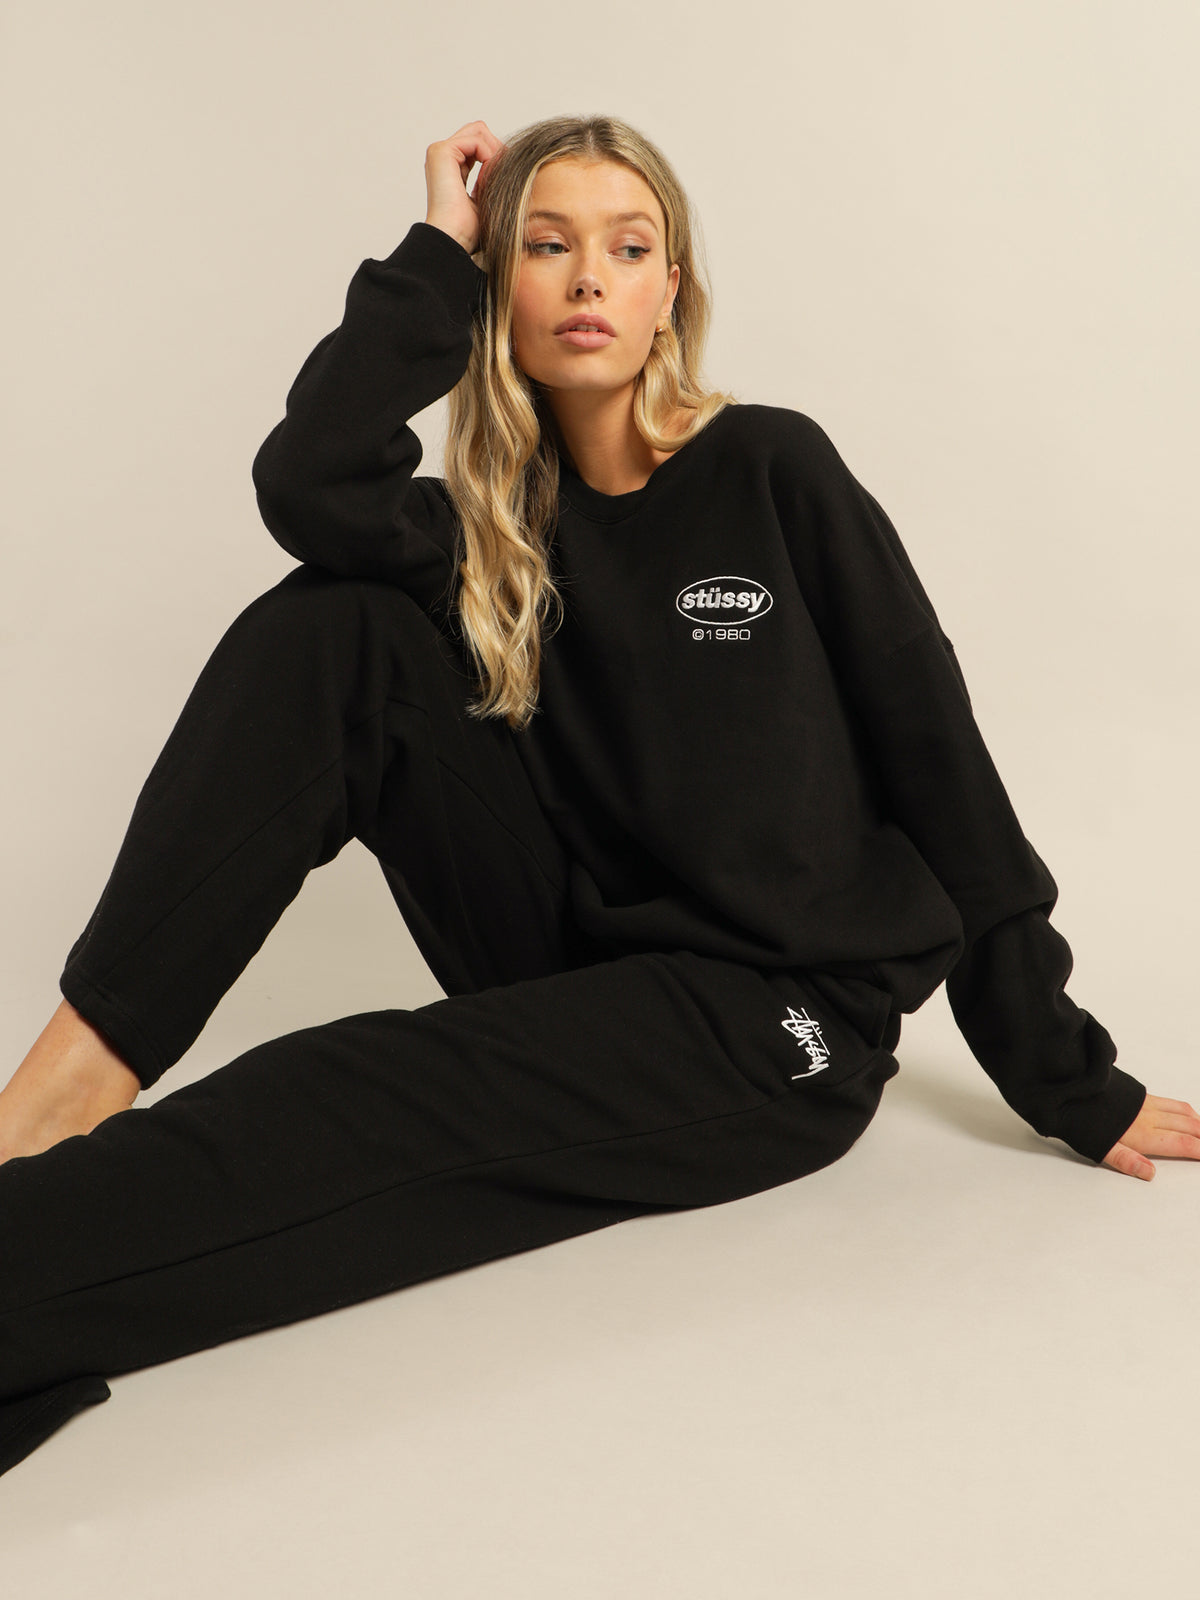 Stock Wide Leg Trackpants in Black